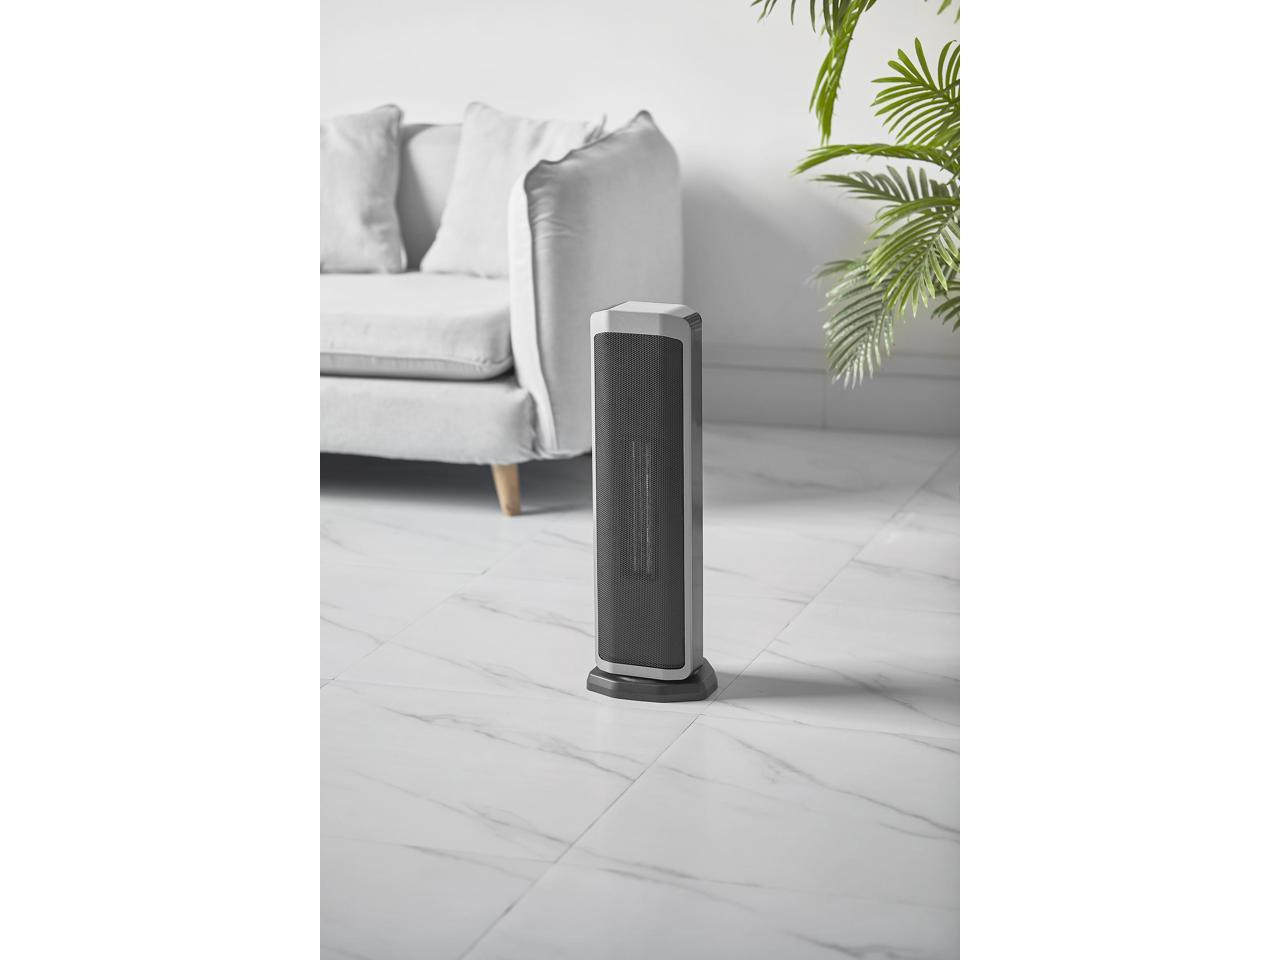 Better Homes & Gardens 23" Electric Ceramic Tower Heater - LED Display & Remote Silver(Refurbished)